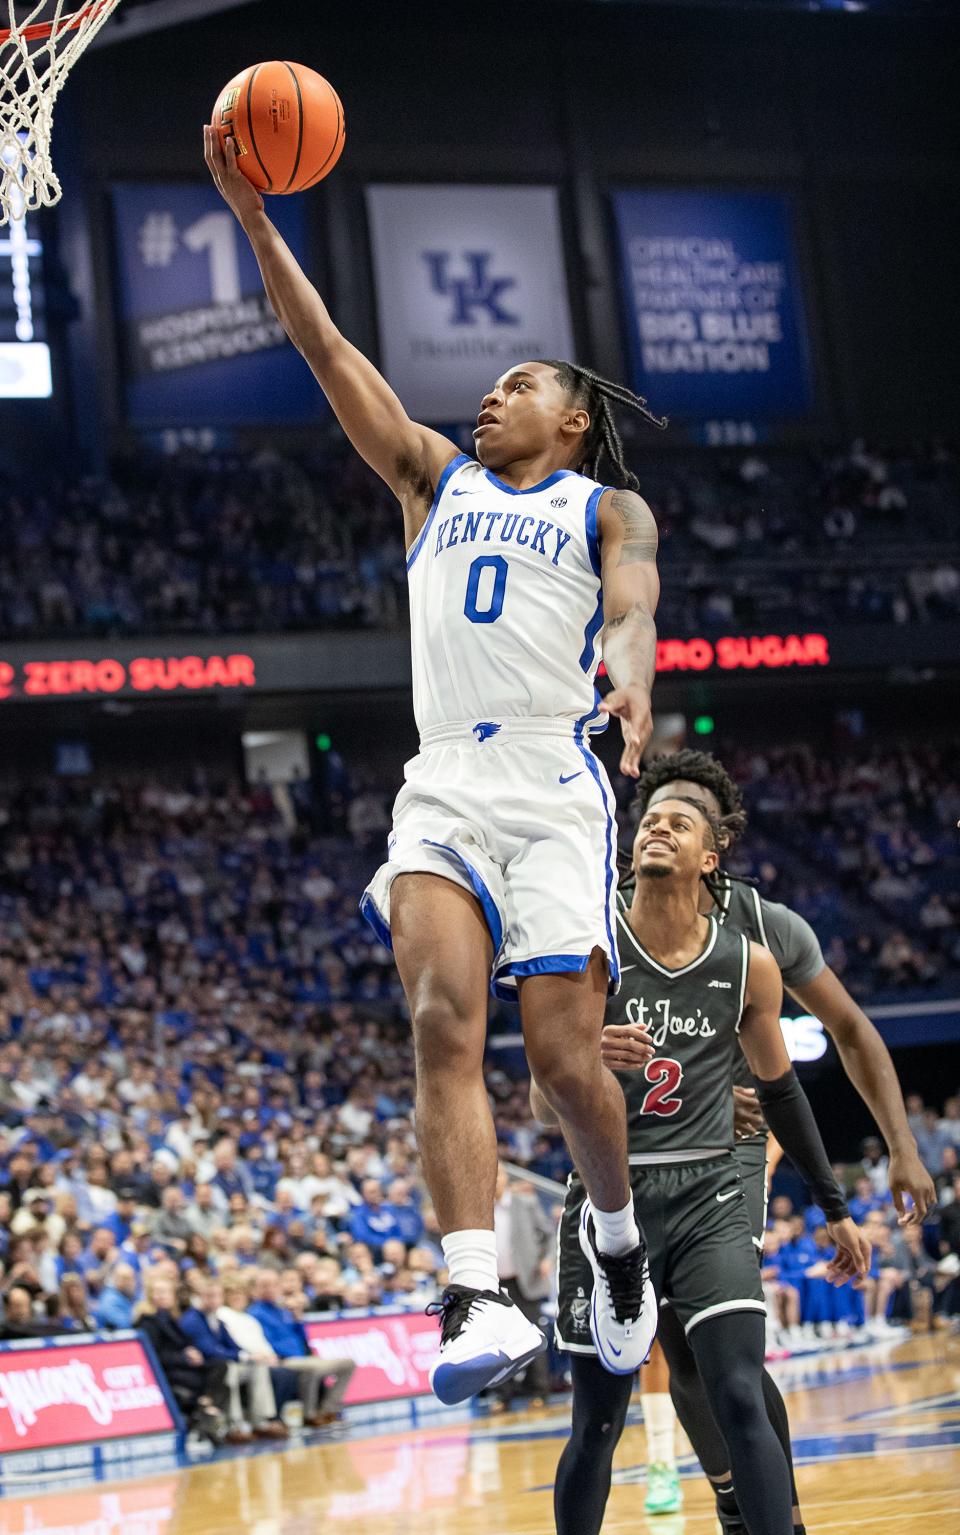 Kentucky freshman Rob Dillingham scores on a layup Monday night. The Wildcats outlasted Saint Joseph's in overtime, 96-88.